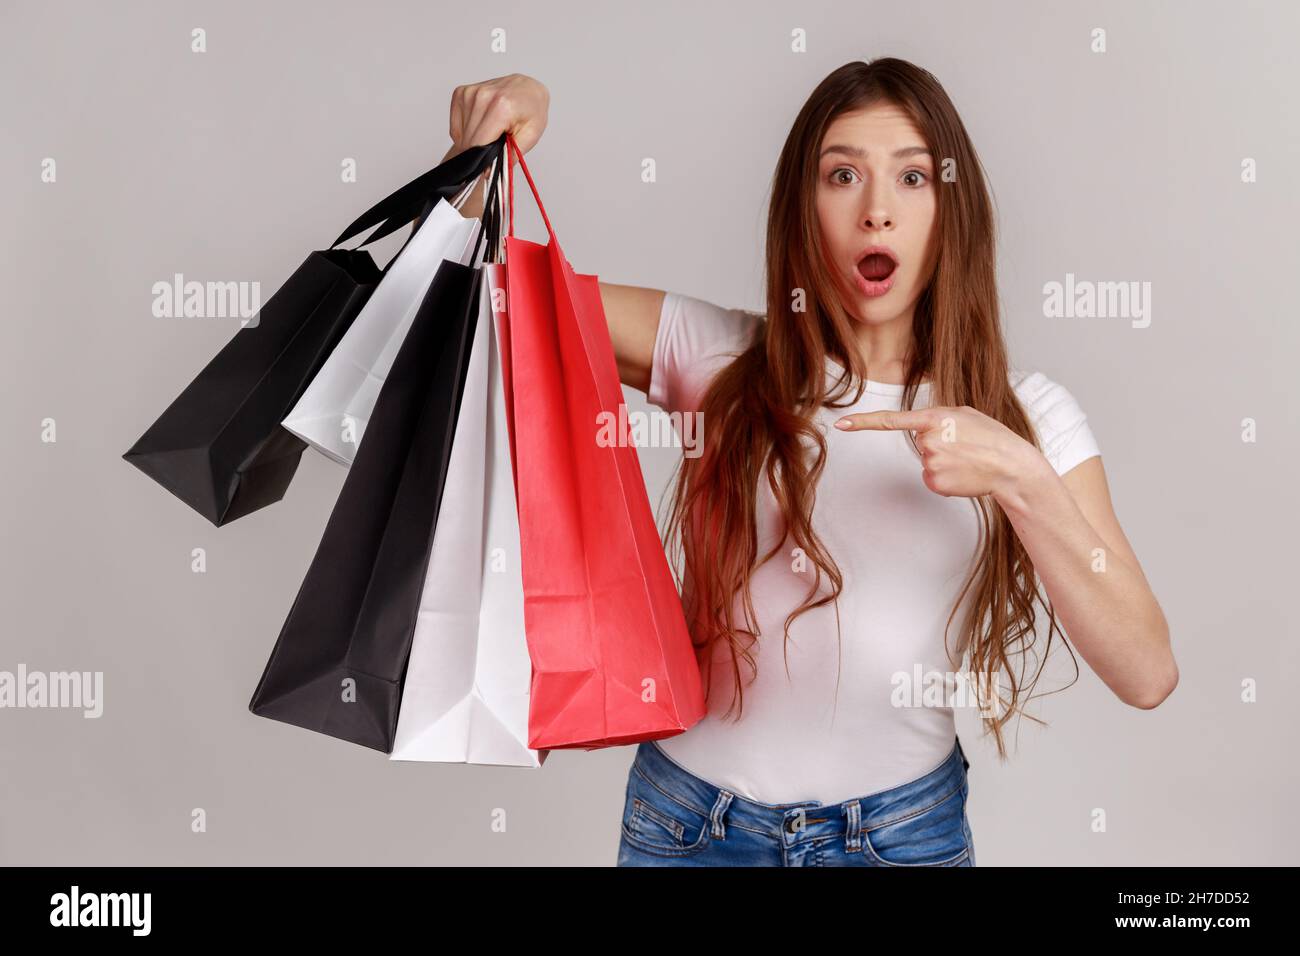 Shocked amazed dark haired woman pointing finger at paper bags in her hand, surprised with shopping, low prices good quality, wearing white T-shirt. Indoor studio shot isolated on gray background. Stock Photo